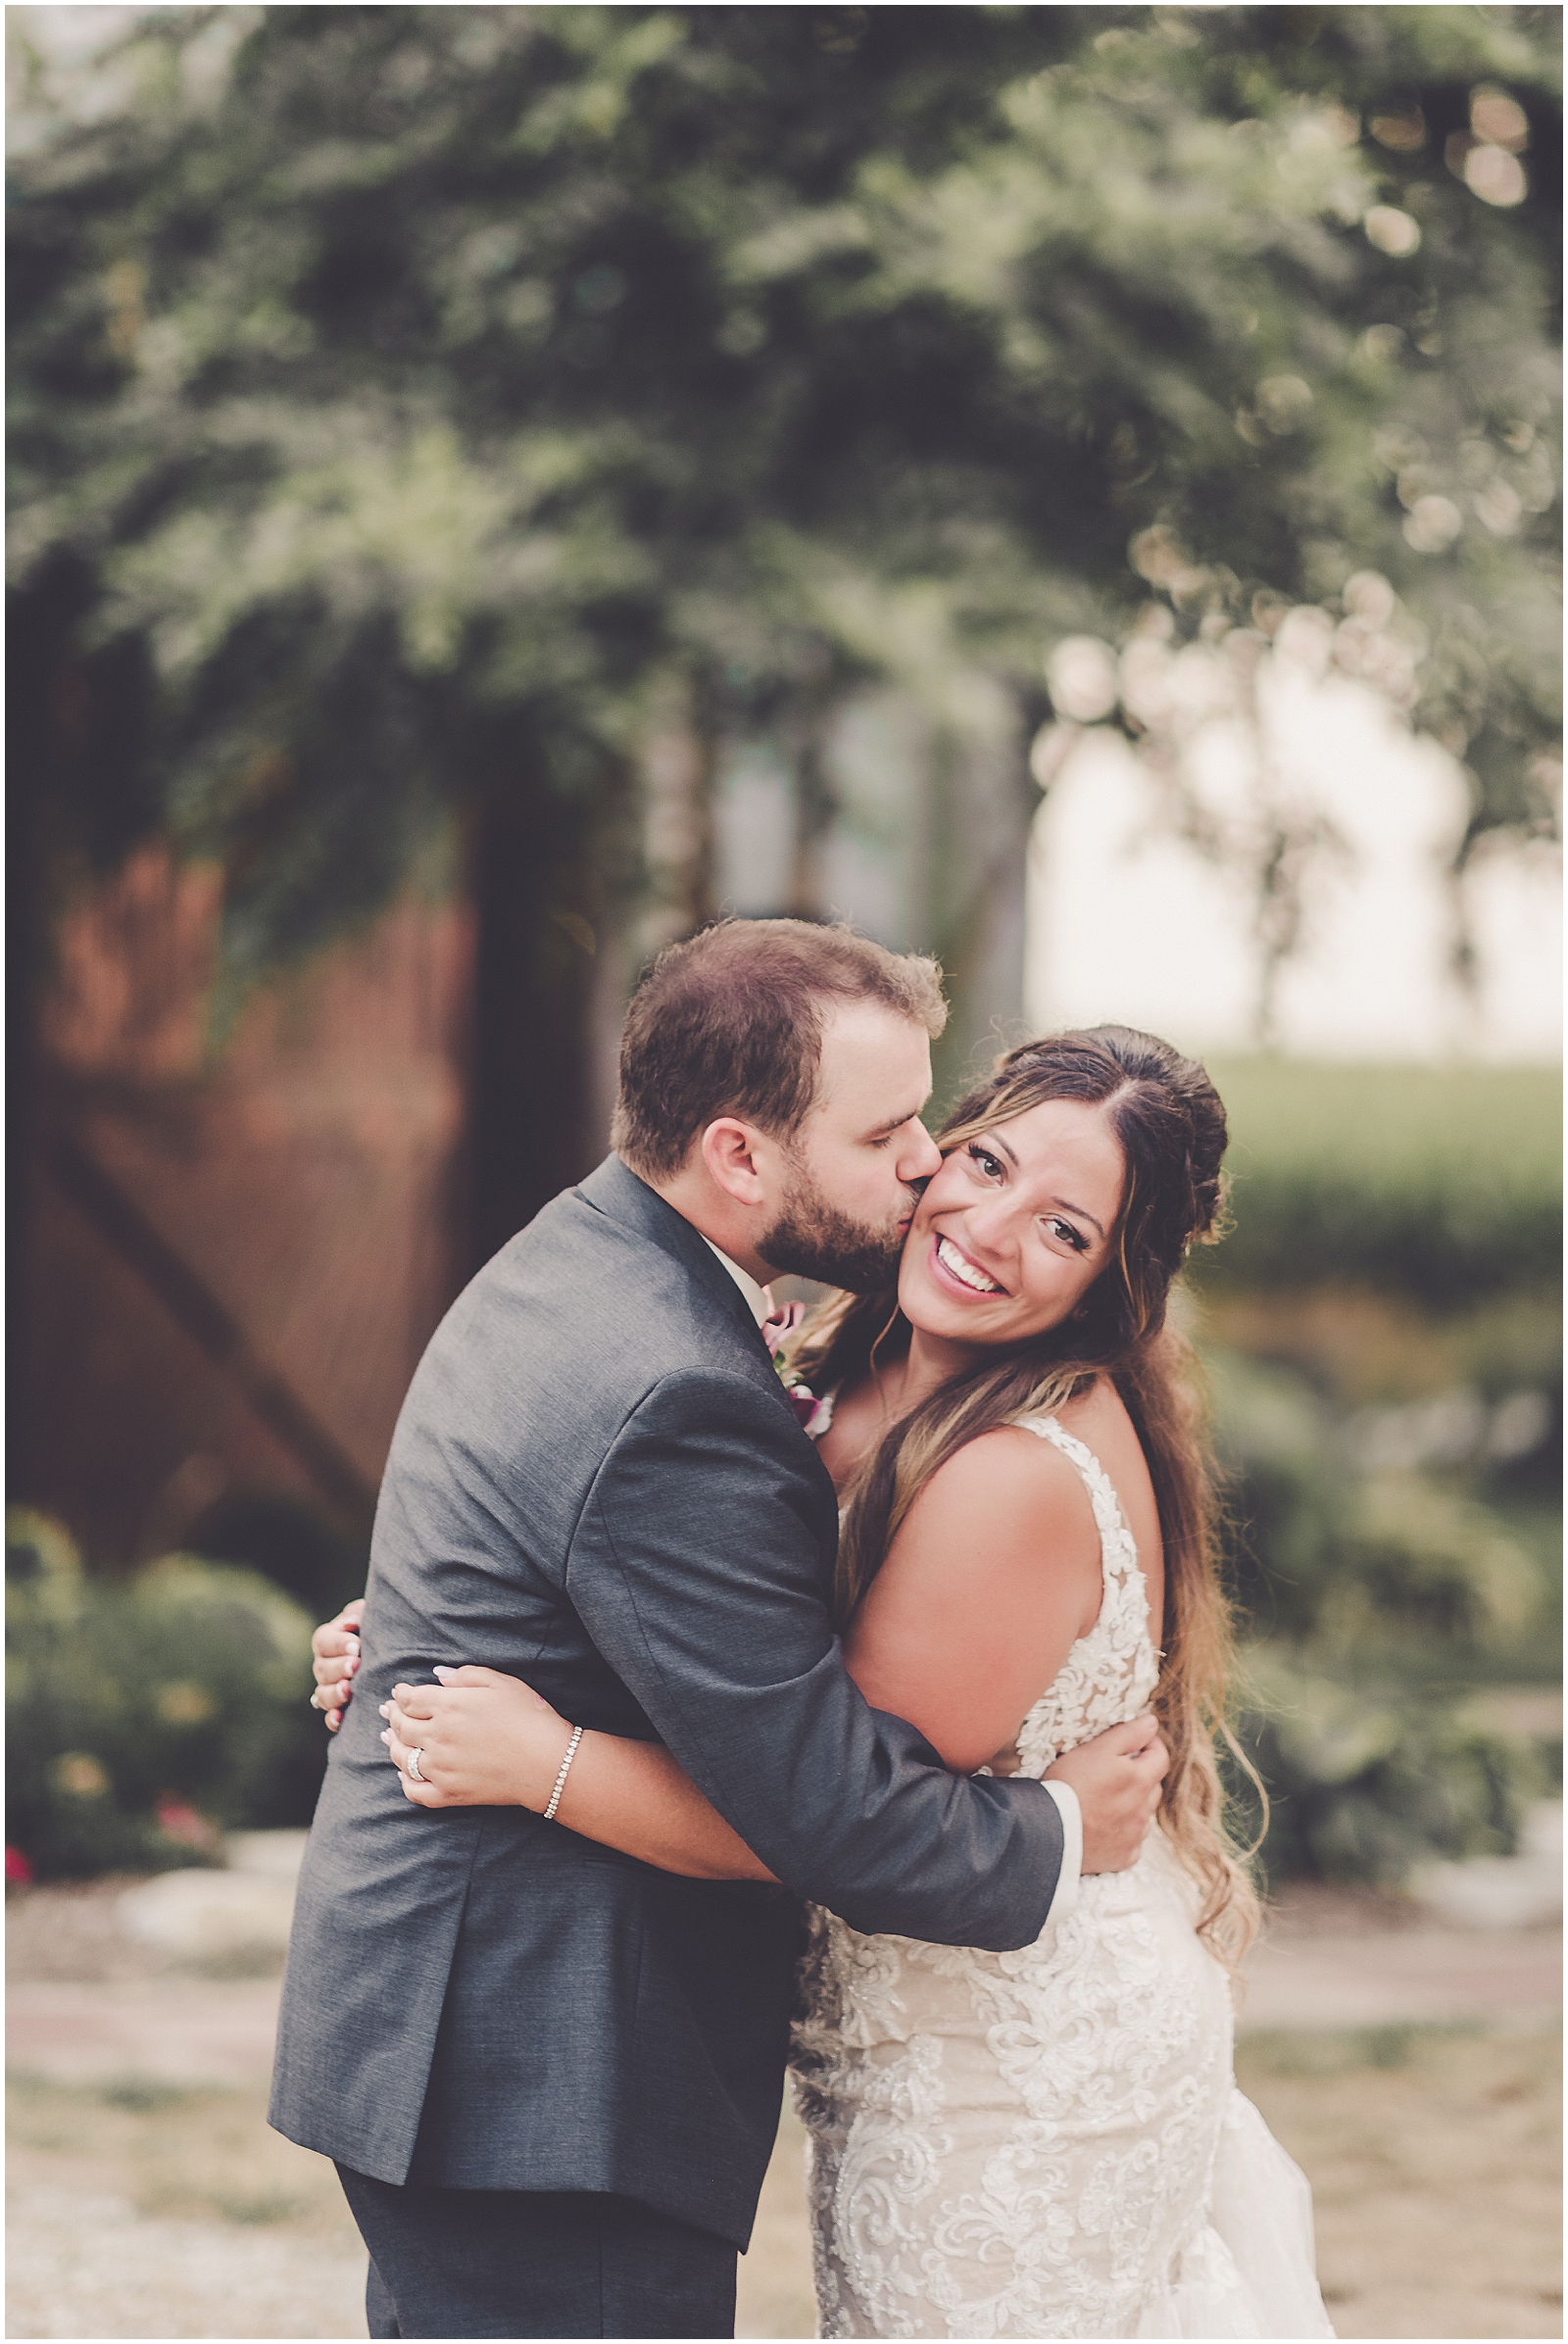 Daniela and Andrew's romantic August wedding at The Mora Farm in Waterman, IL with Chicagoland wedding photographer Kara Evans Photographer.